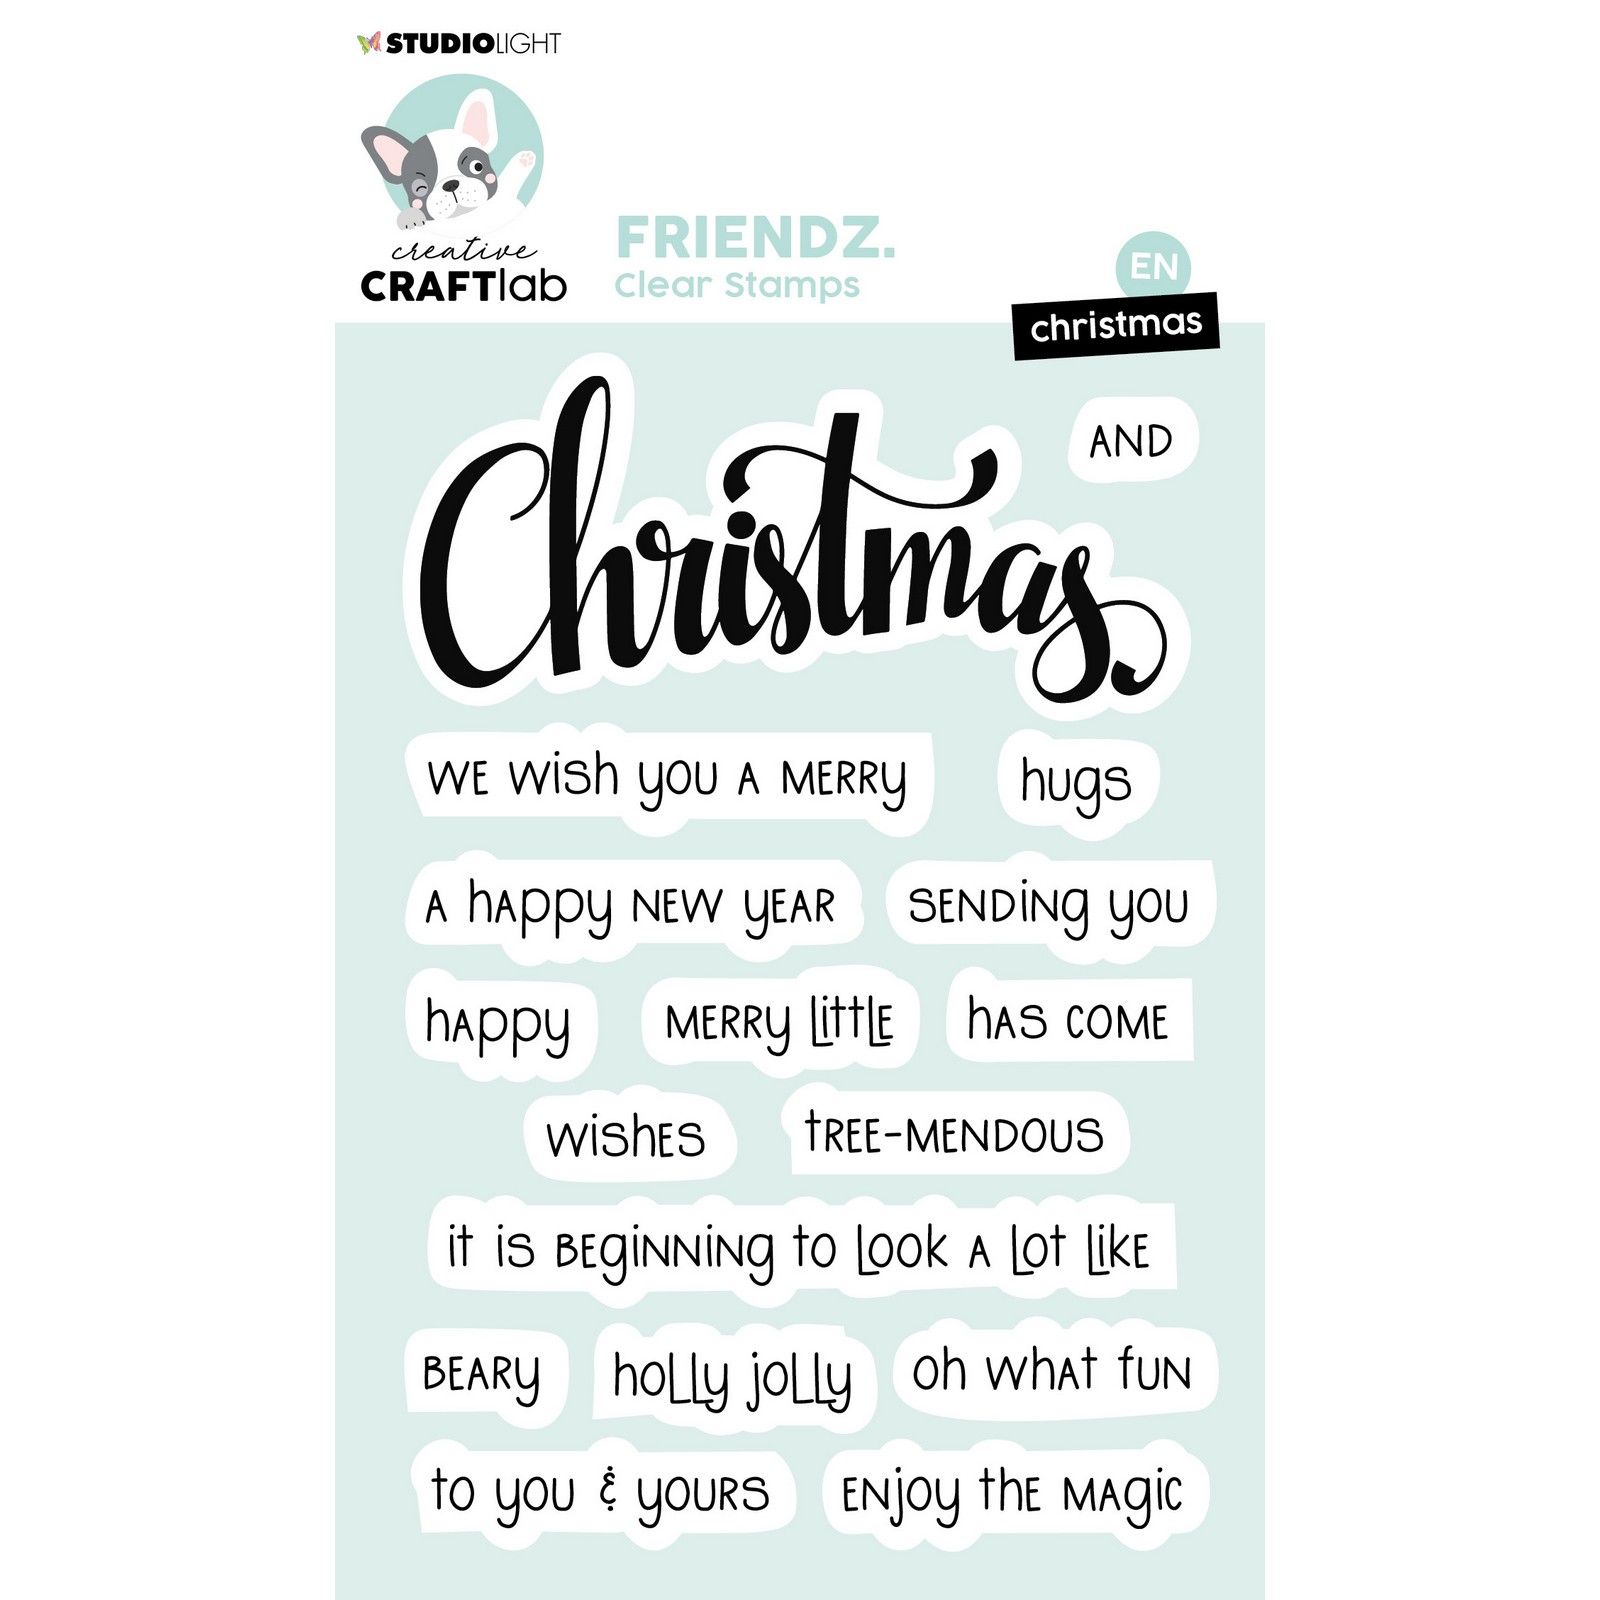 Creative Craftlab • Friendz Clear Stamp Christmas combo